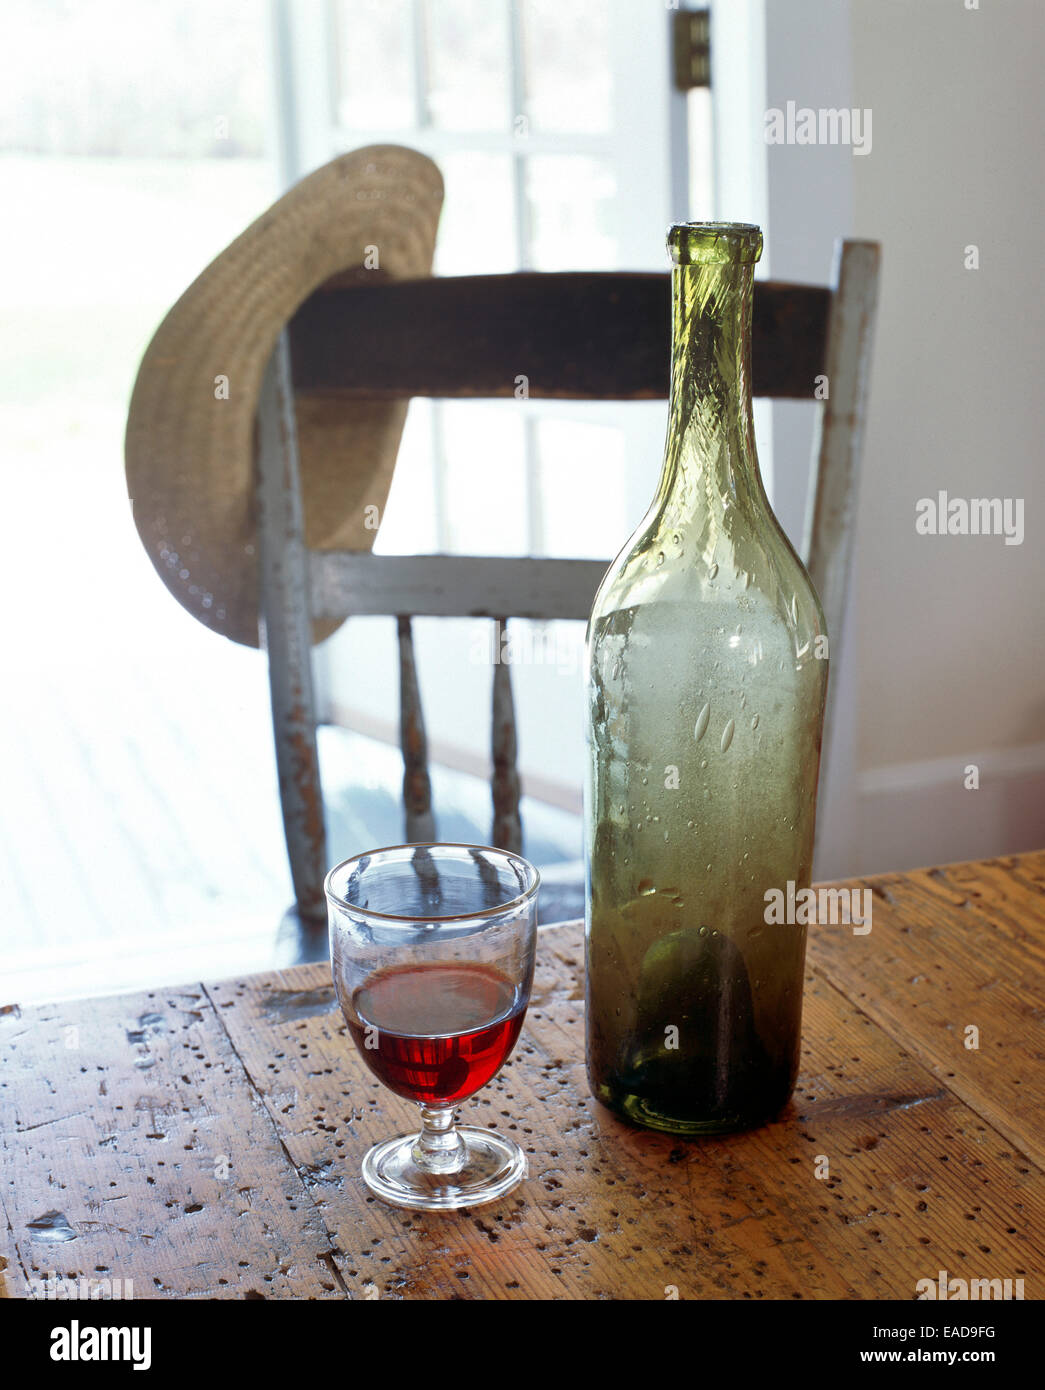 Empty bottle and glass of red wine by open door with straw hat resting on chair Stock Photo